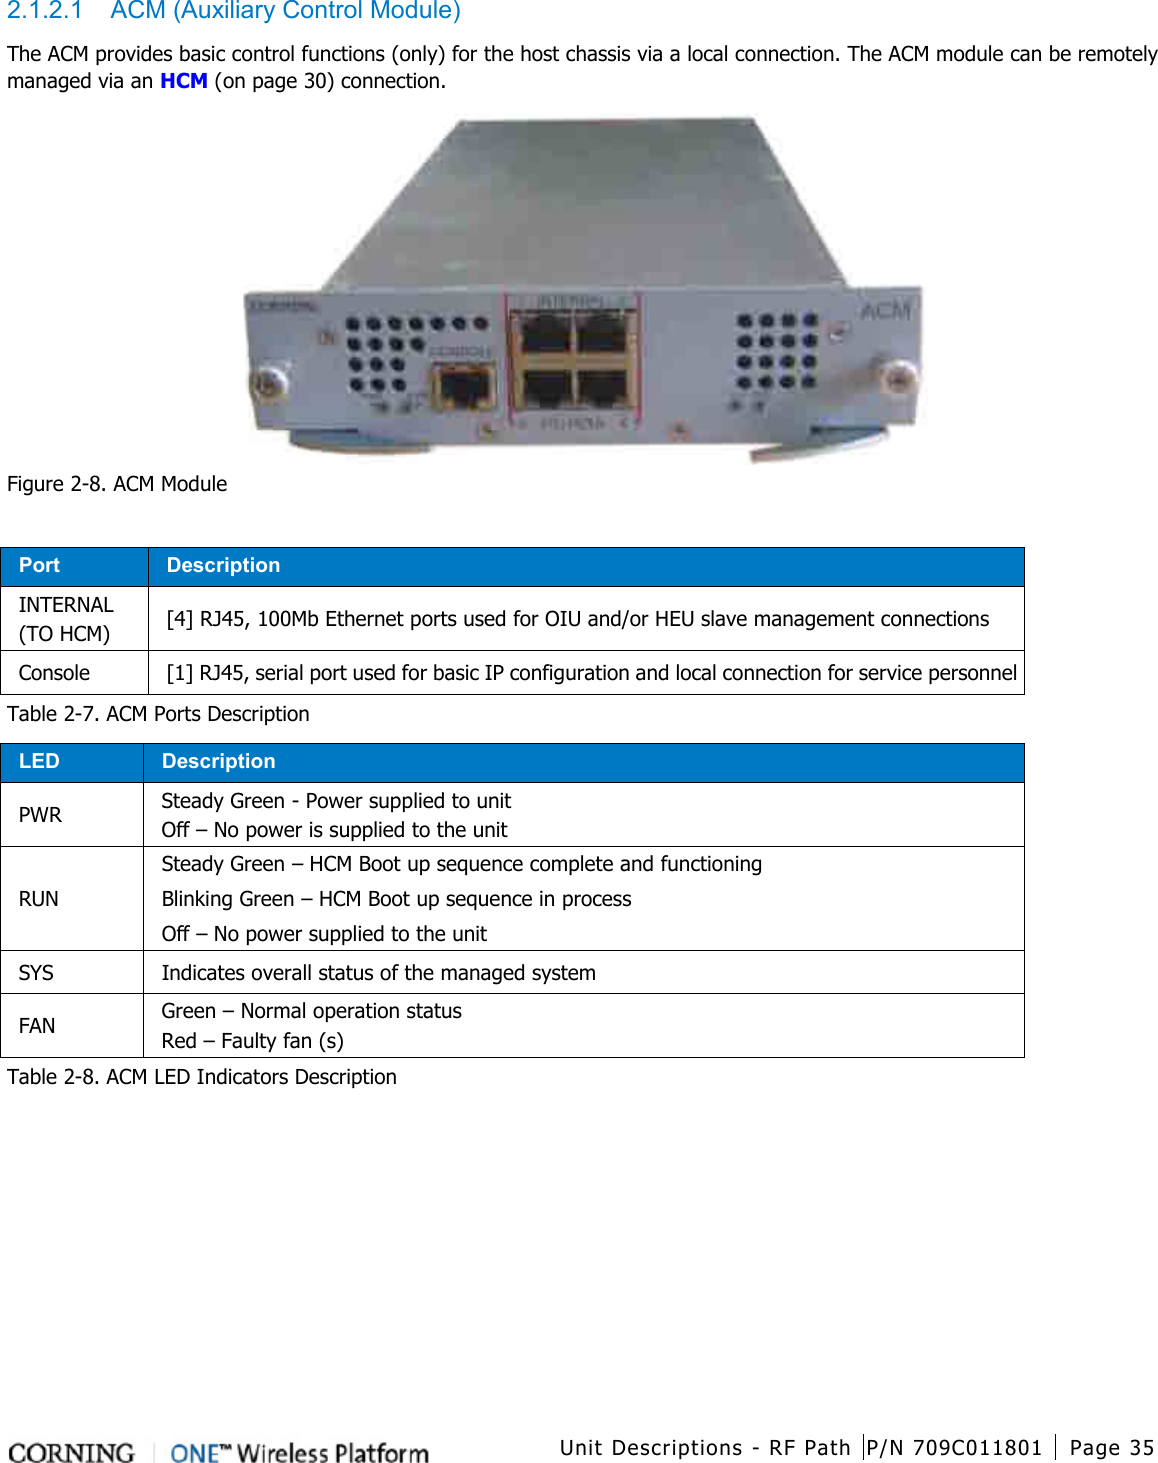  Unit Descriptions - RF Path P/N 709C011801 Page 35   2.1.2.1  ACM (Auxiliary Control Module) The ACM provides basic control functions (only) for the host chassis via a local connection. The ACM module can be remotely managed via an HCM (on page 30) connection.  Figure  2-8. ACM Module  Port Description INTERNAL   (TO HCM) [4] RJ45, 100Mb Ethernet ports used for OIU and/or HEU slave management connections Console [1] RJ45, serial port used for basic IP configuration and local connection for service personnel Table  2-7. ACM Ports Description LED Description PWR Steady Green - Power supplied to unit Off – No power is supplied to the unit RUN Steady Green – HCM Boot up sequence complete and functioning Blinking Green – HCM Boot up sequence in process Off – No power supplied to the unit SYS Indicates overall status of the managed system FAN Green – Normal operation status Red – Faulty fan (s) Table  2-8. ACM LED Indicators Description    